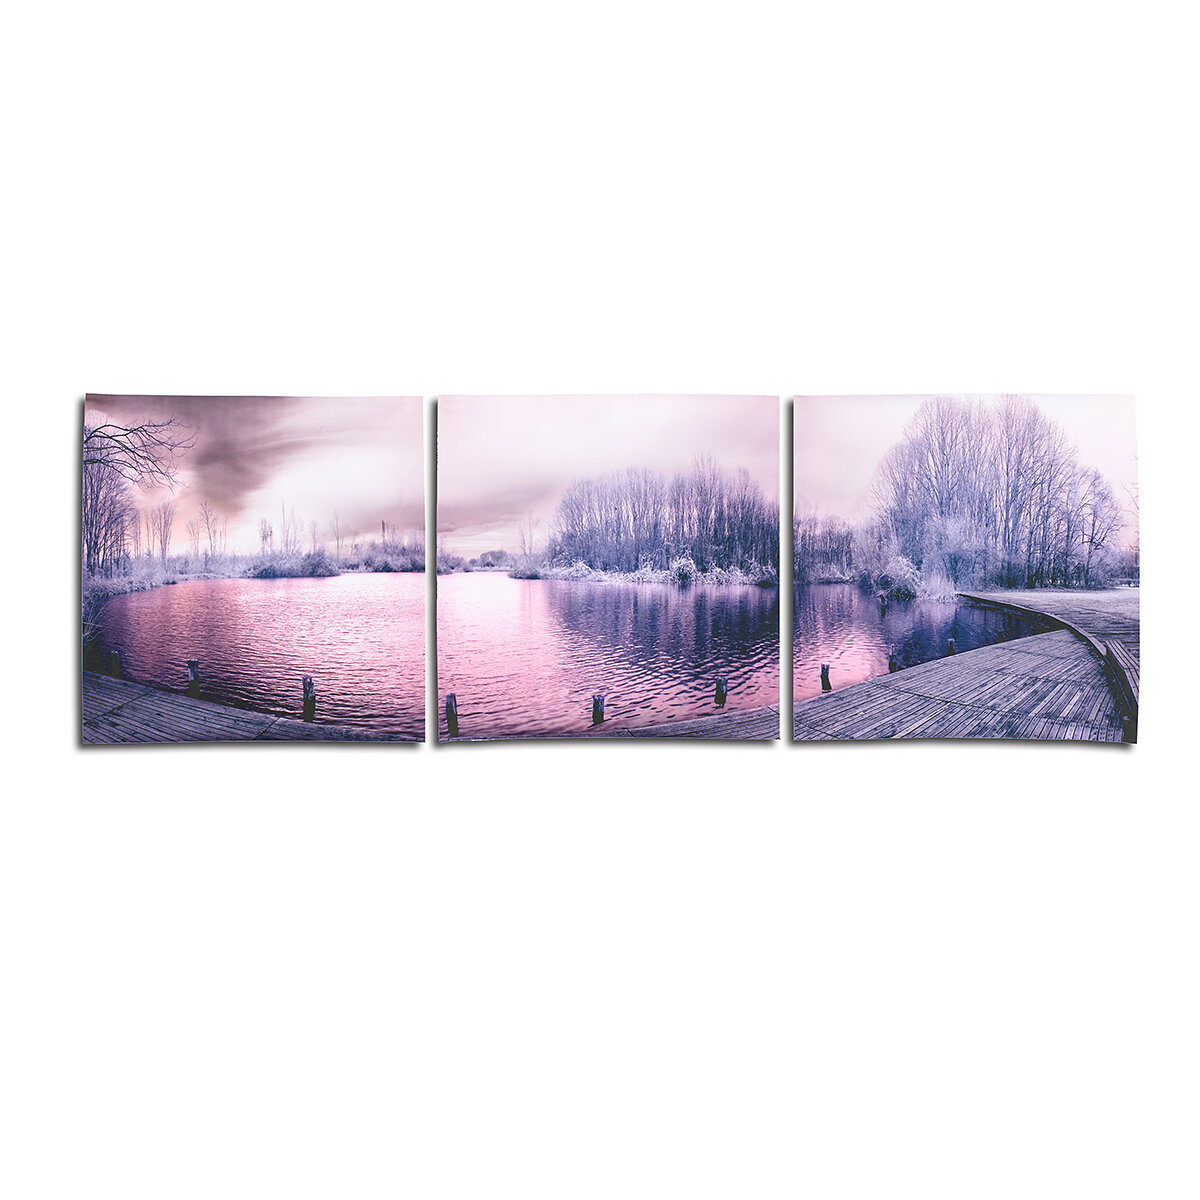 

3Pcs Canvas Print Paintings Purple Lake Landscape Oil Painting Wall Decorative Printing Art Picture Frameless Home Offic